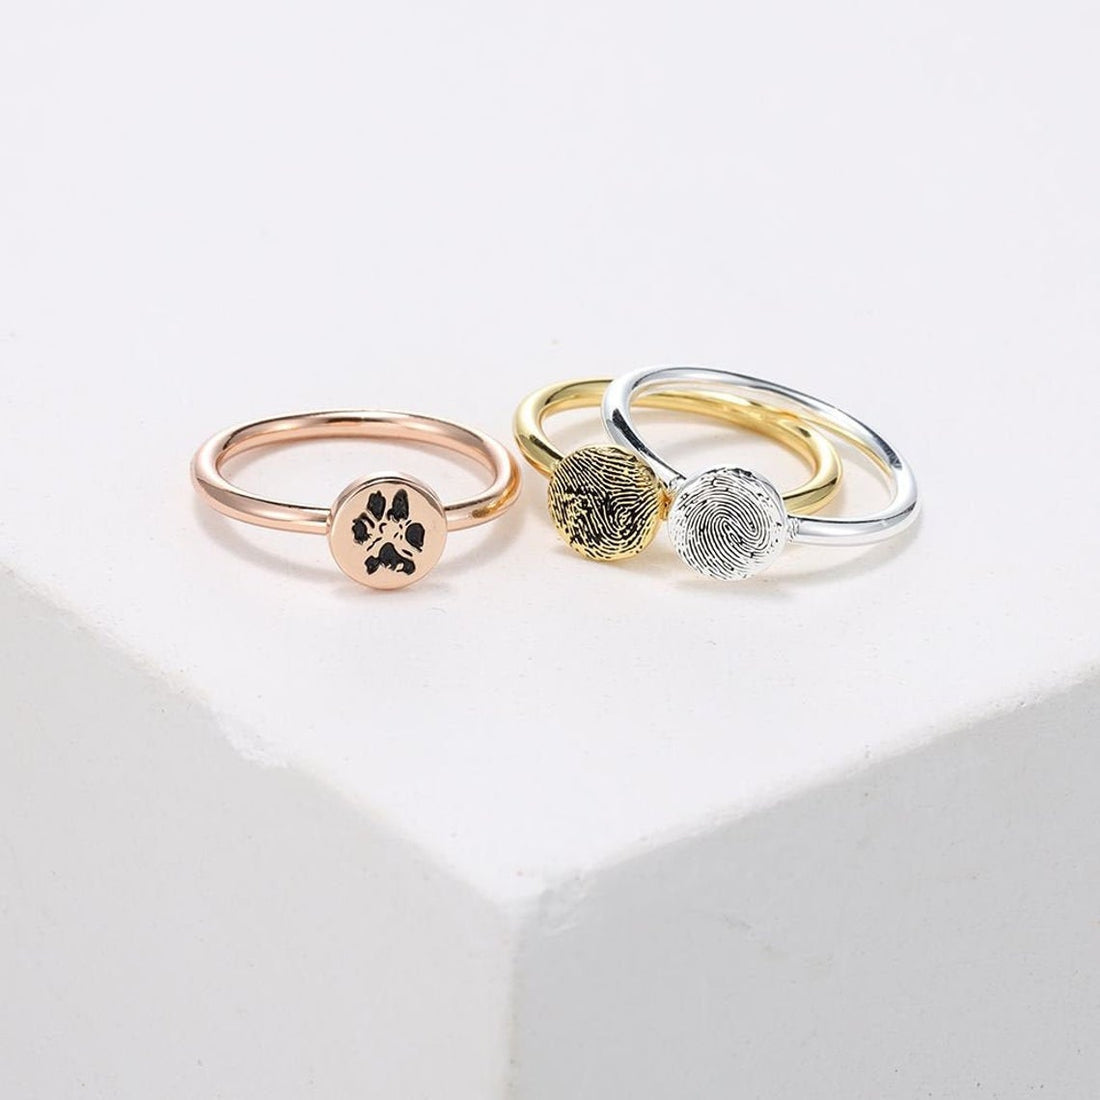 Cherish Your Furry Friend with Personalised Pet Jewellery from GenYStudio